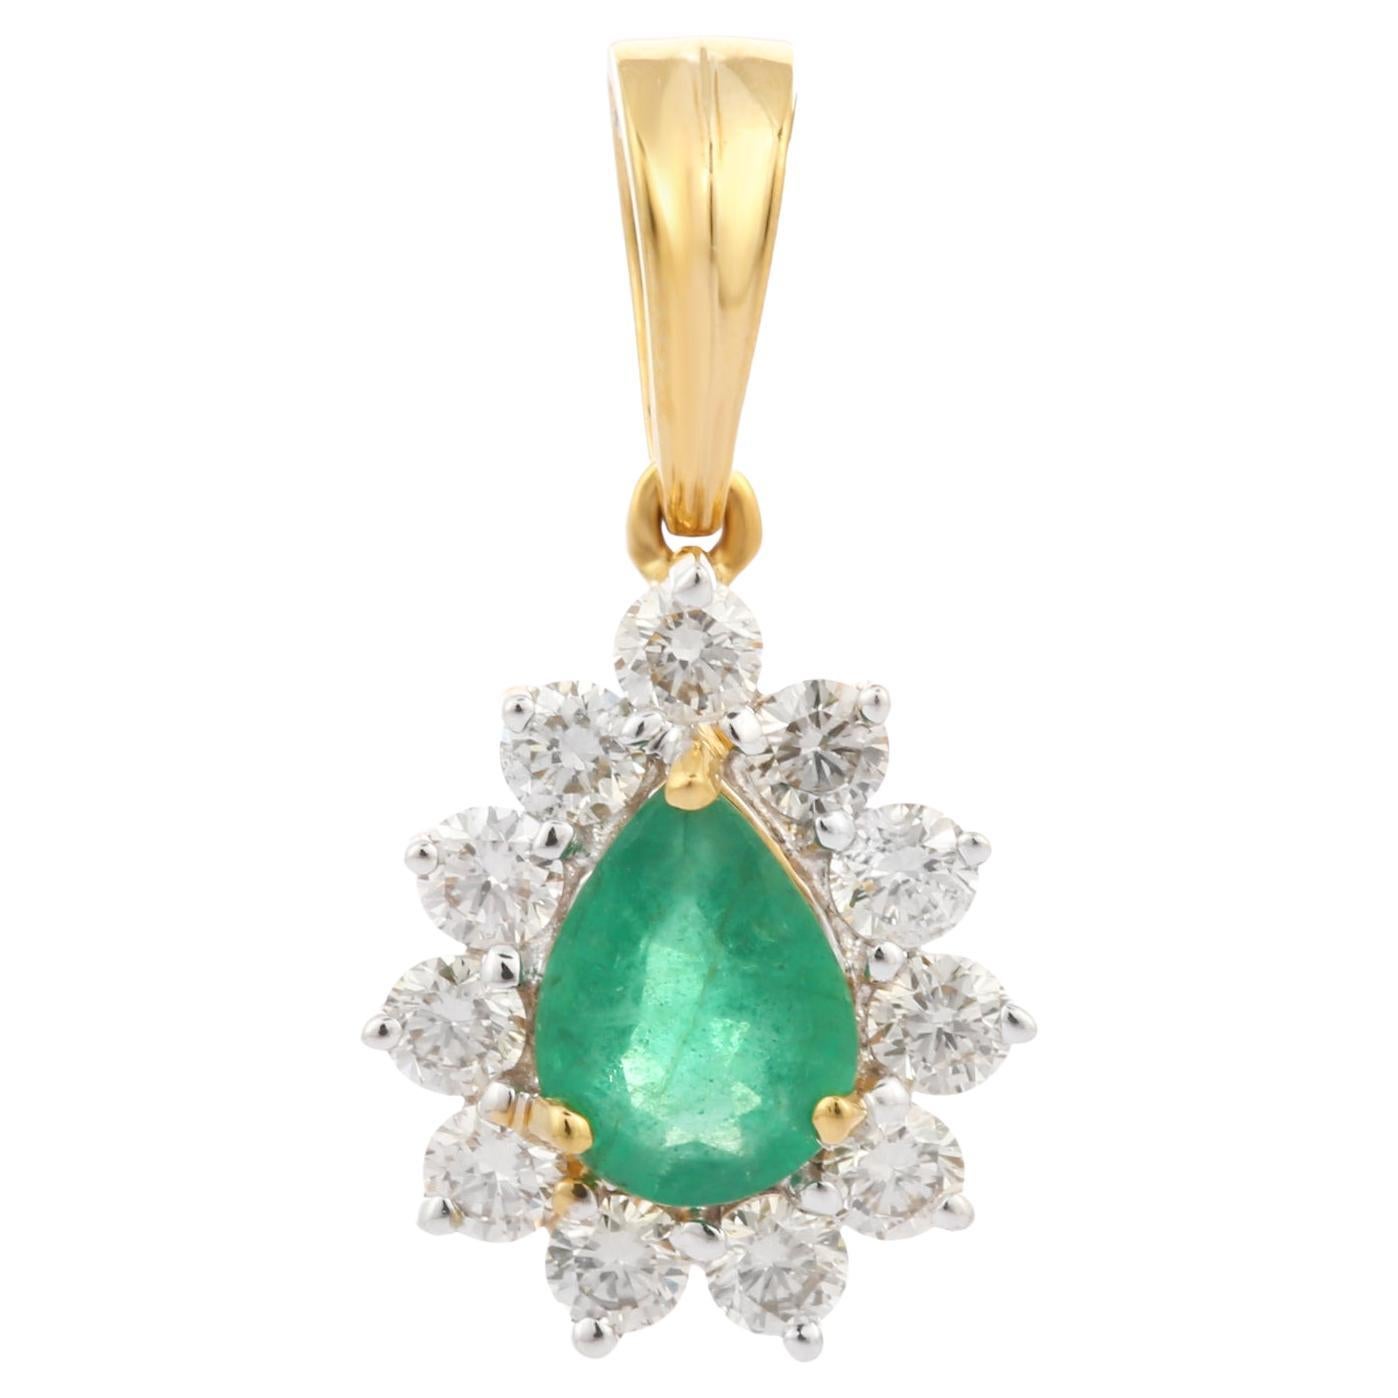 Natural Pear Cut Emerald and Diamond Pendant Necklace in 18K Yellow Gold